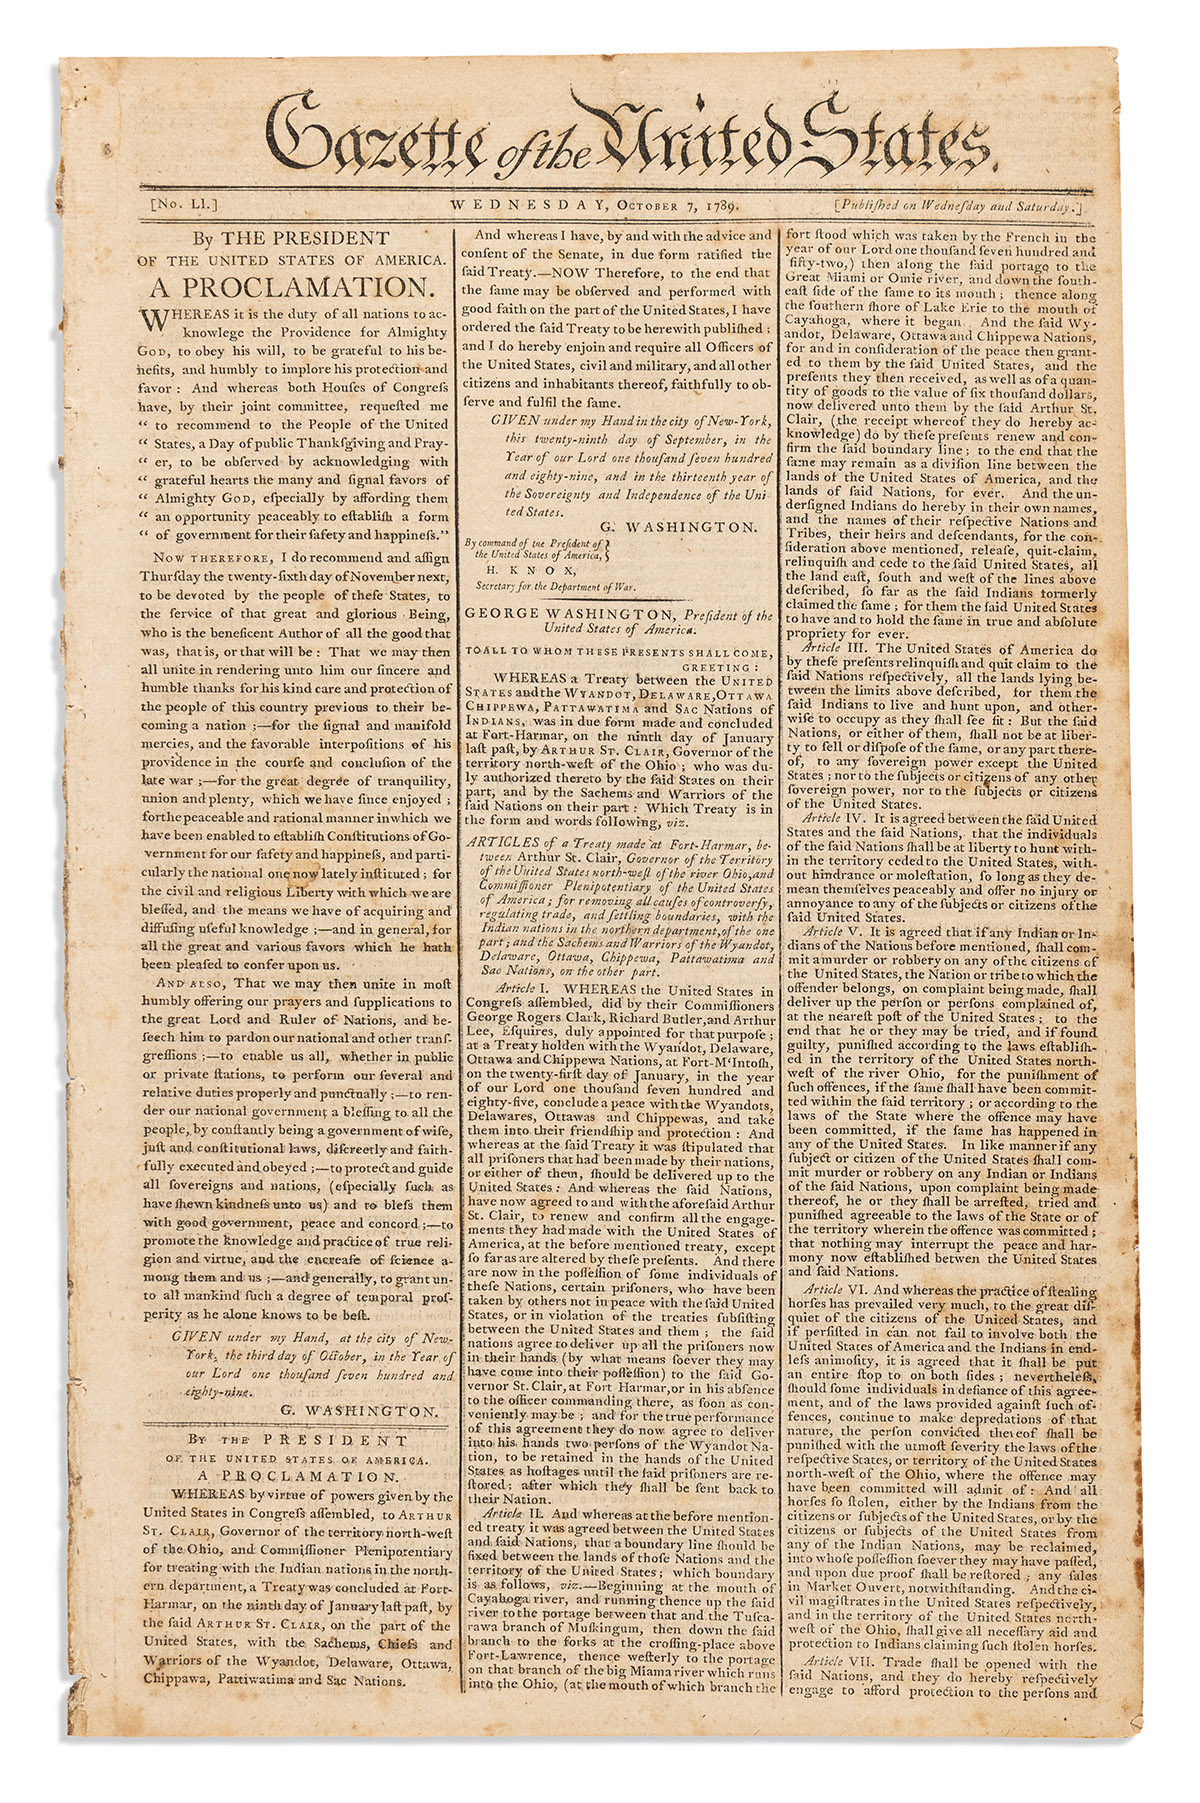 GEORGE WASHINGTON. Issue of the Gazette of the United States with the proclamation of the first Thanksgiving under the Constitution.